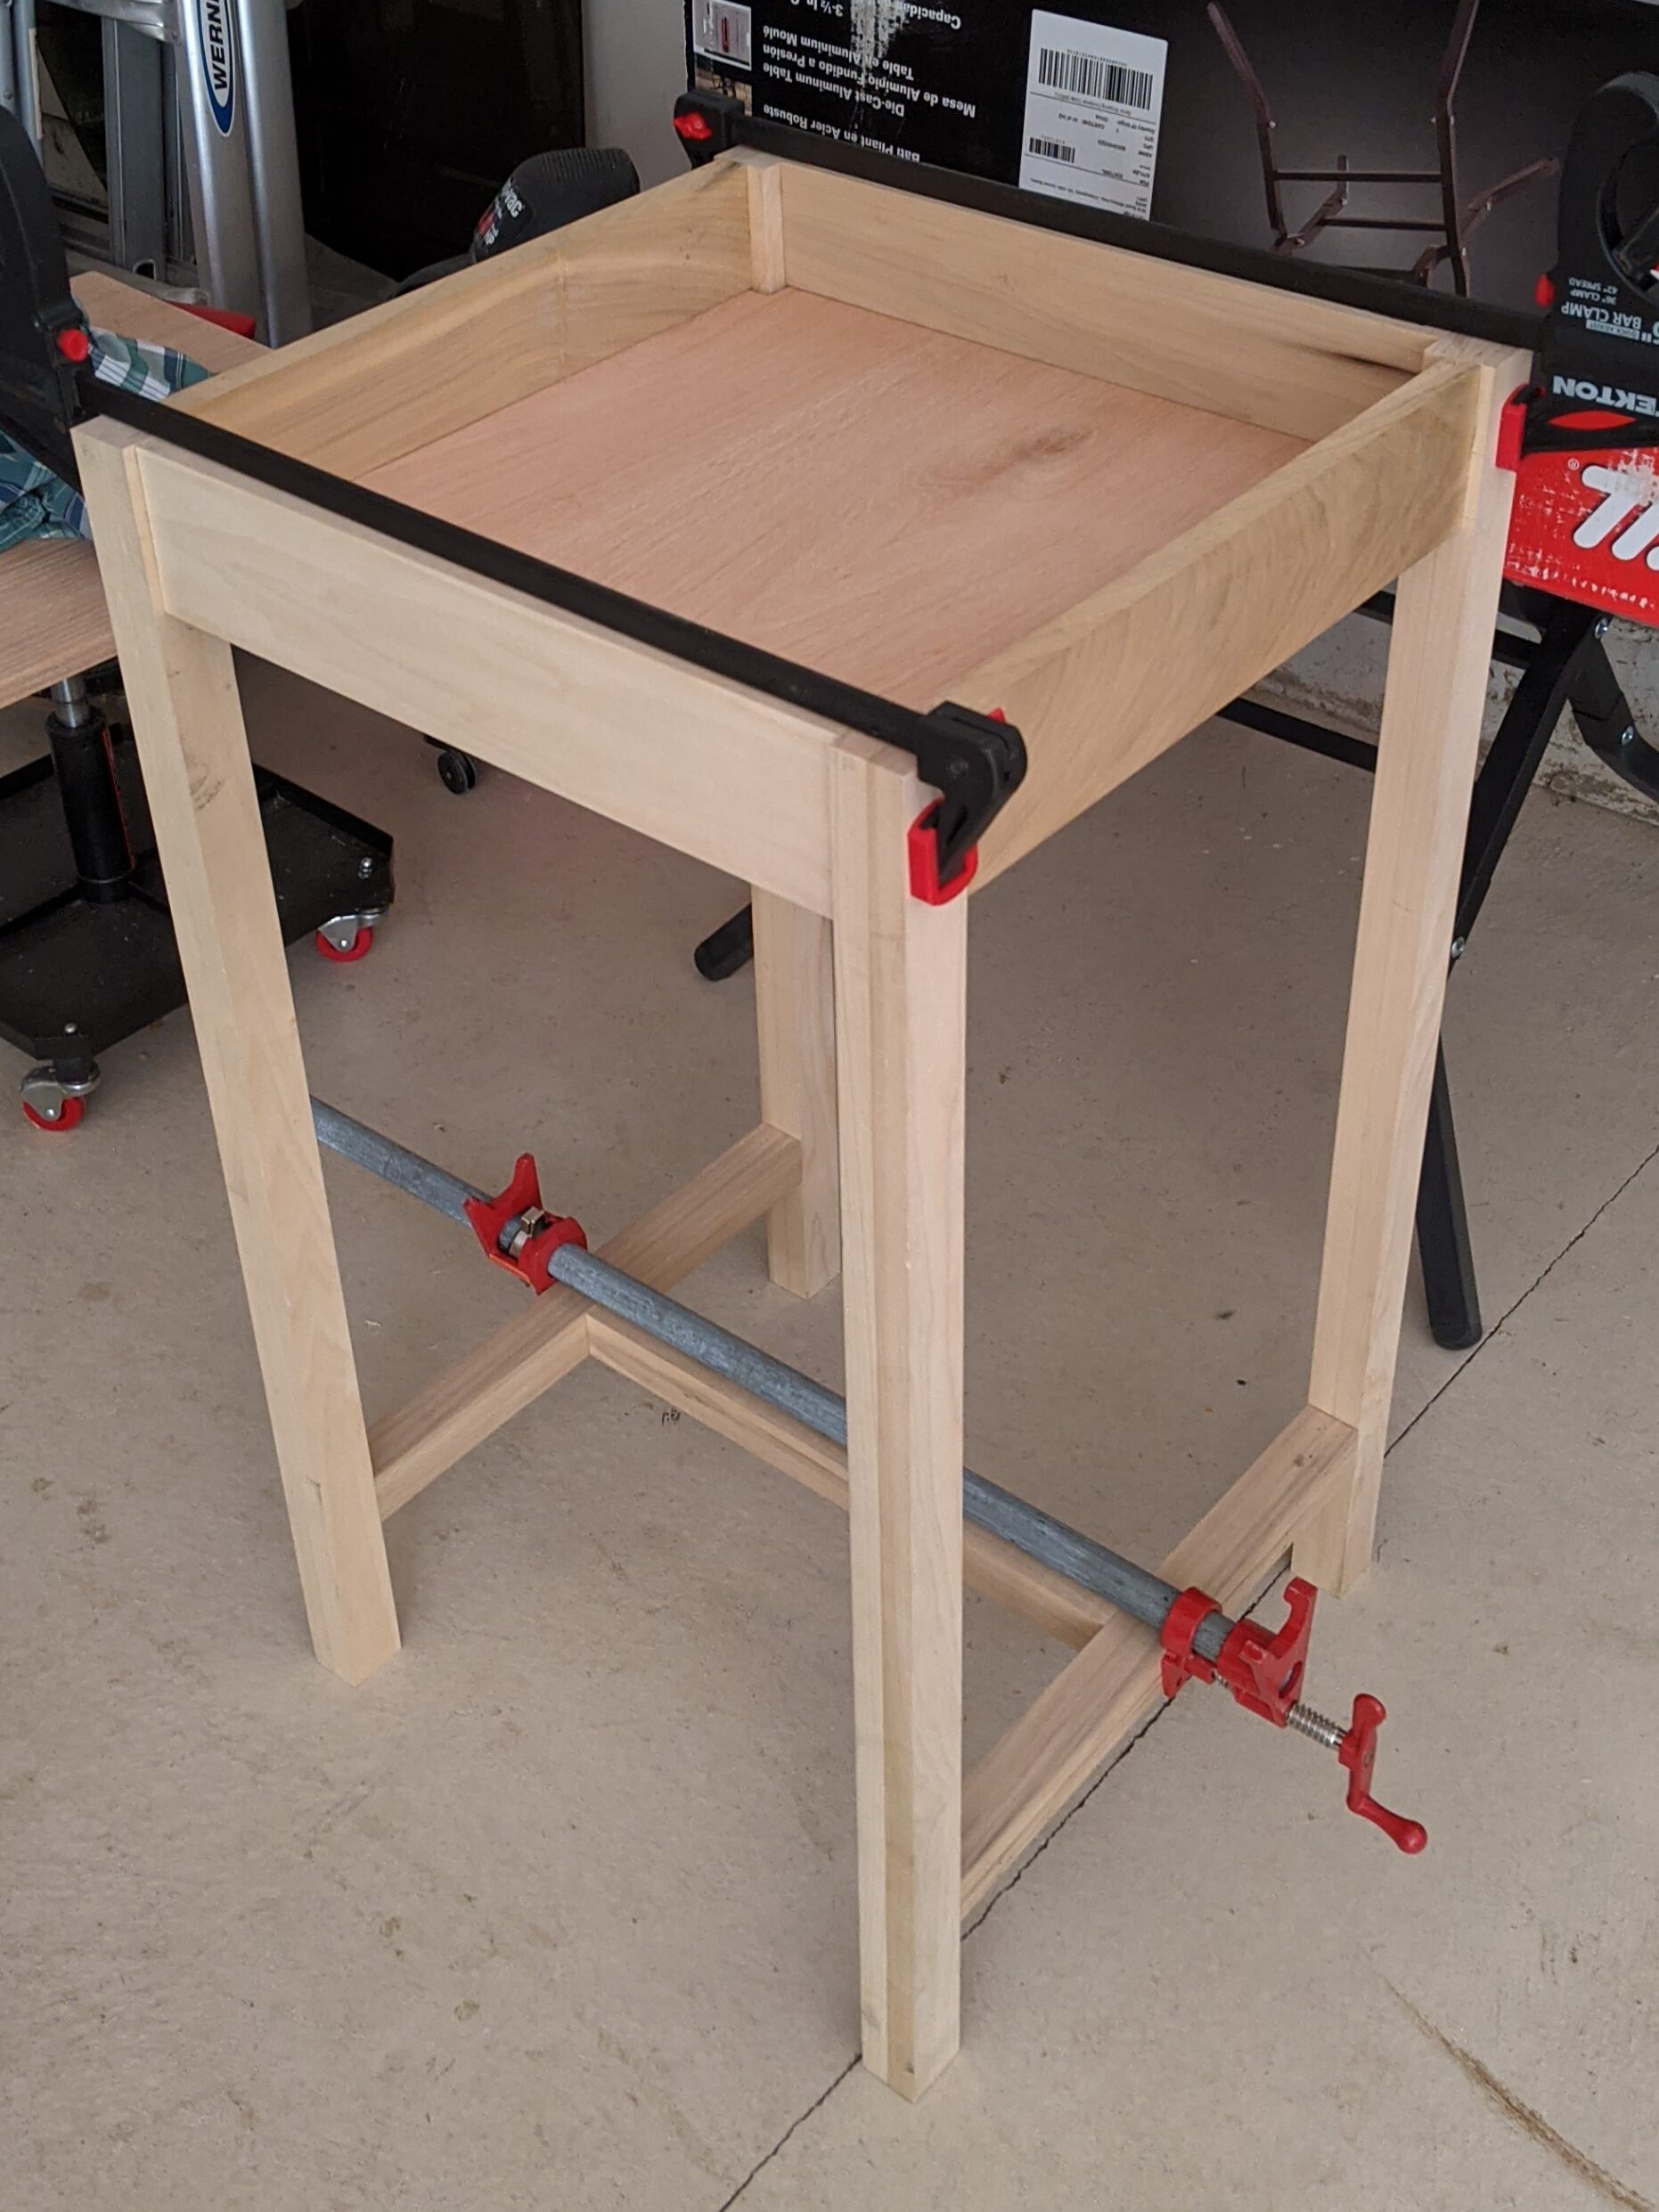 Final glue-up on my side table